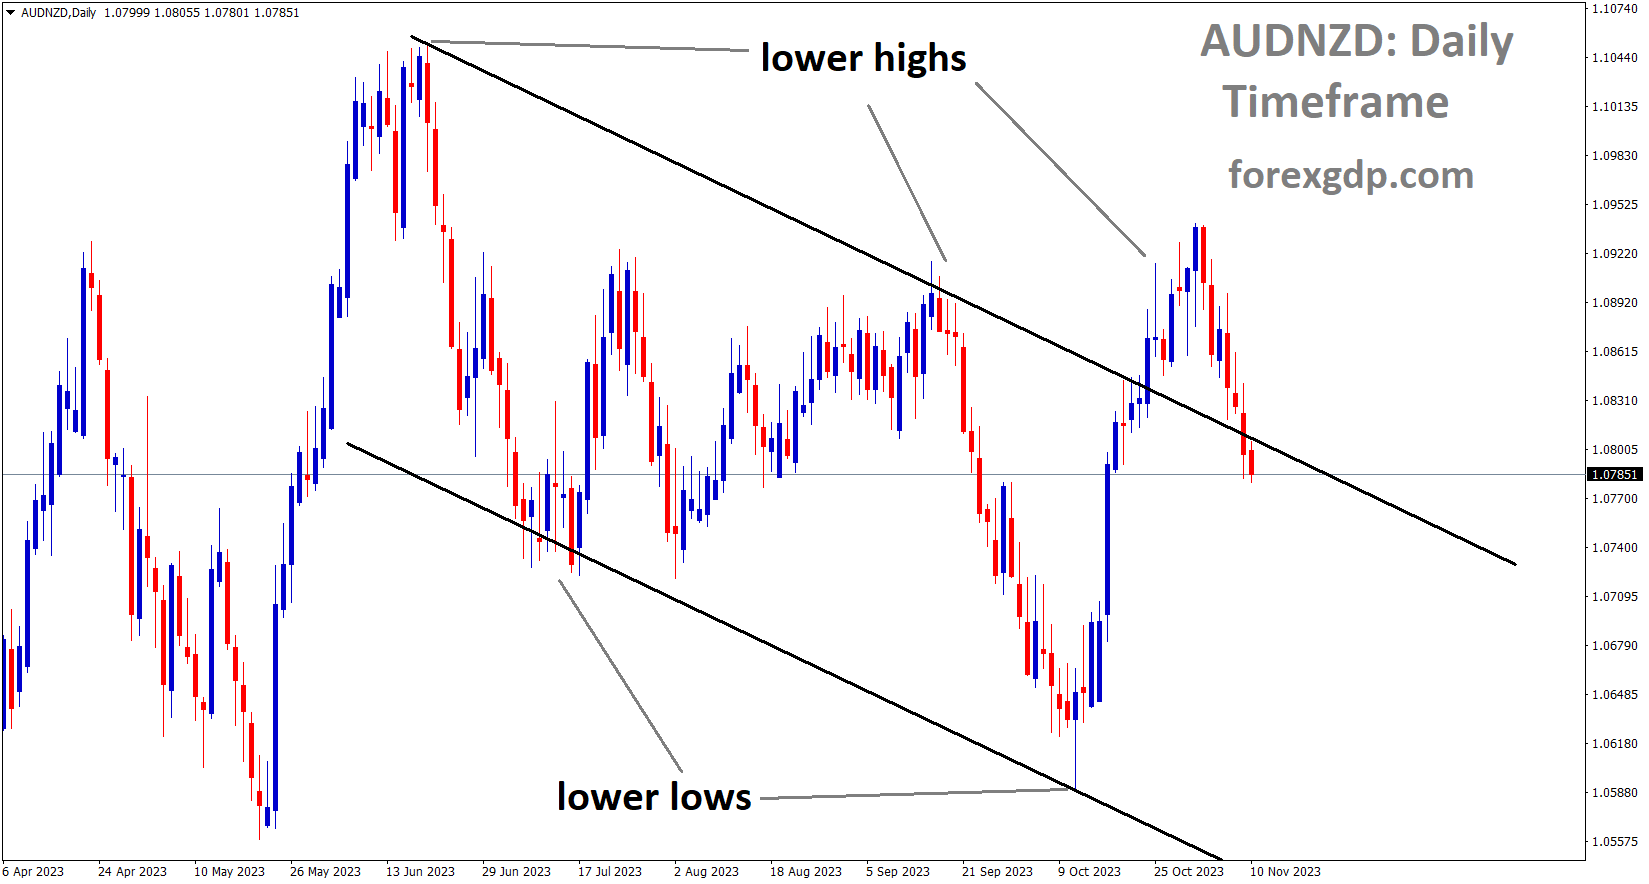 AUDNZD is moving in the Descending channel and the market has fallen from the lower high area of the channel